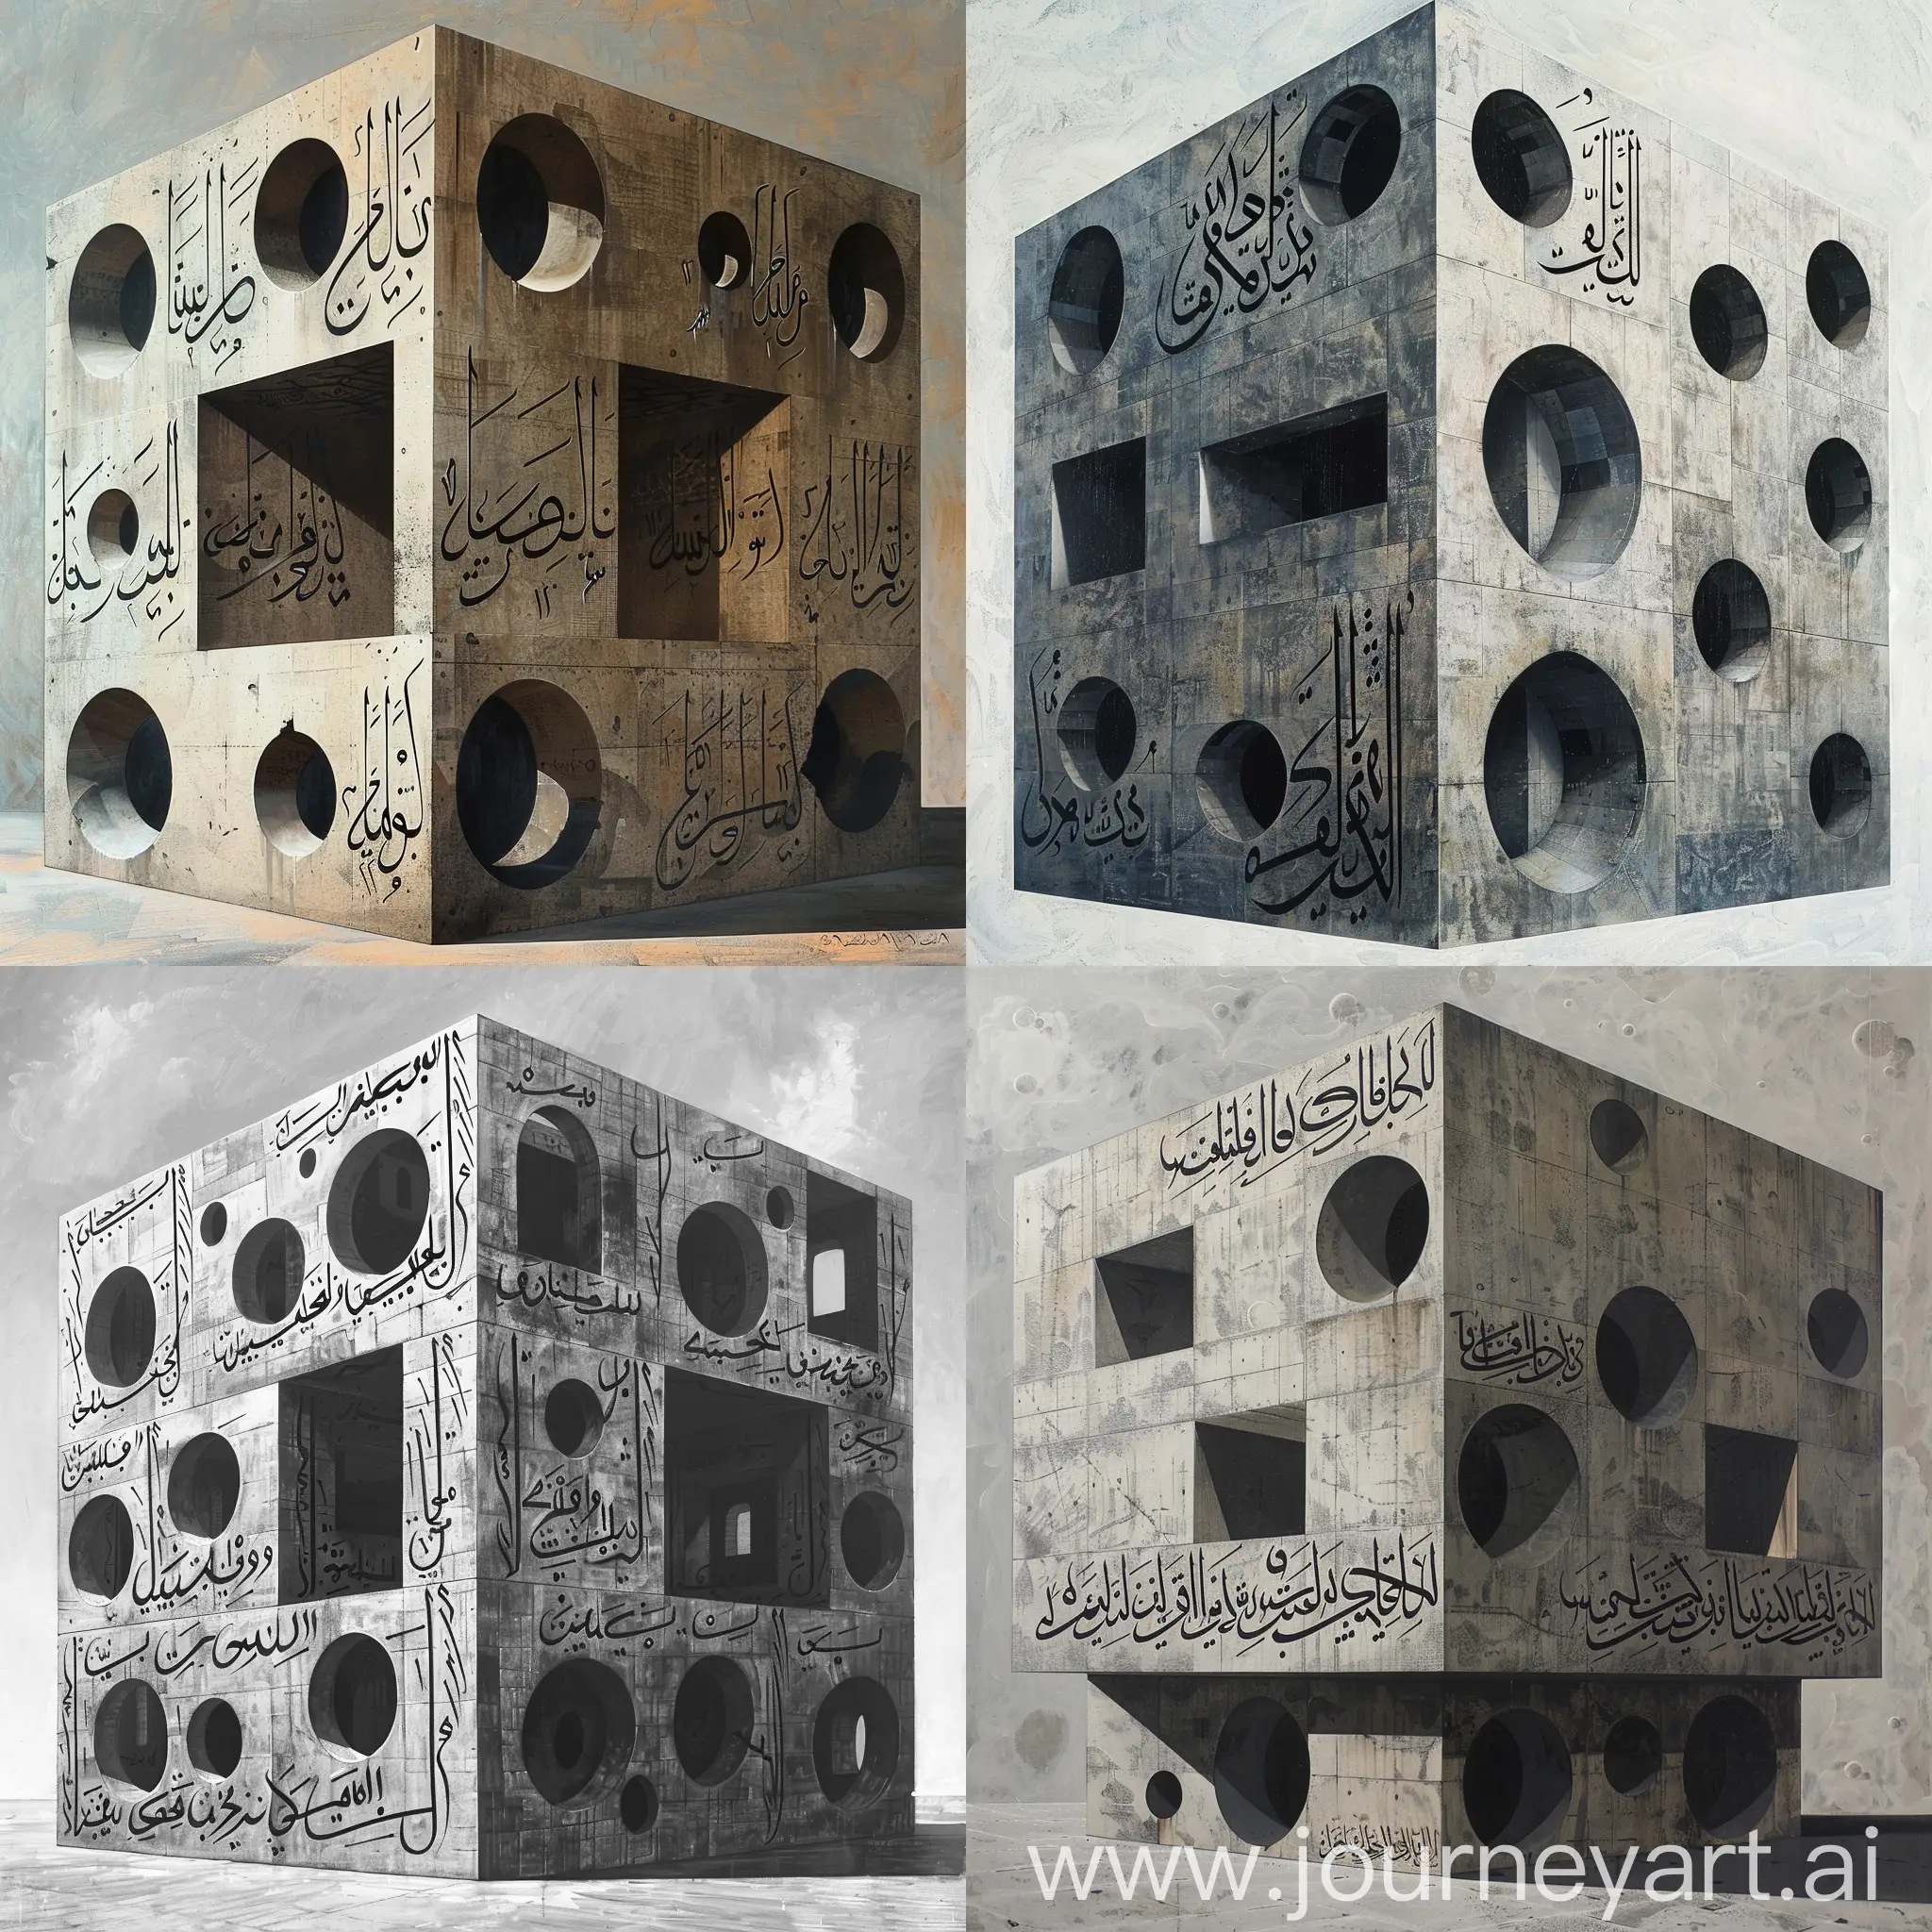 persian calligraphy aroun a cube building, with several round windows-- real picture